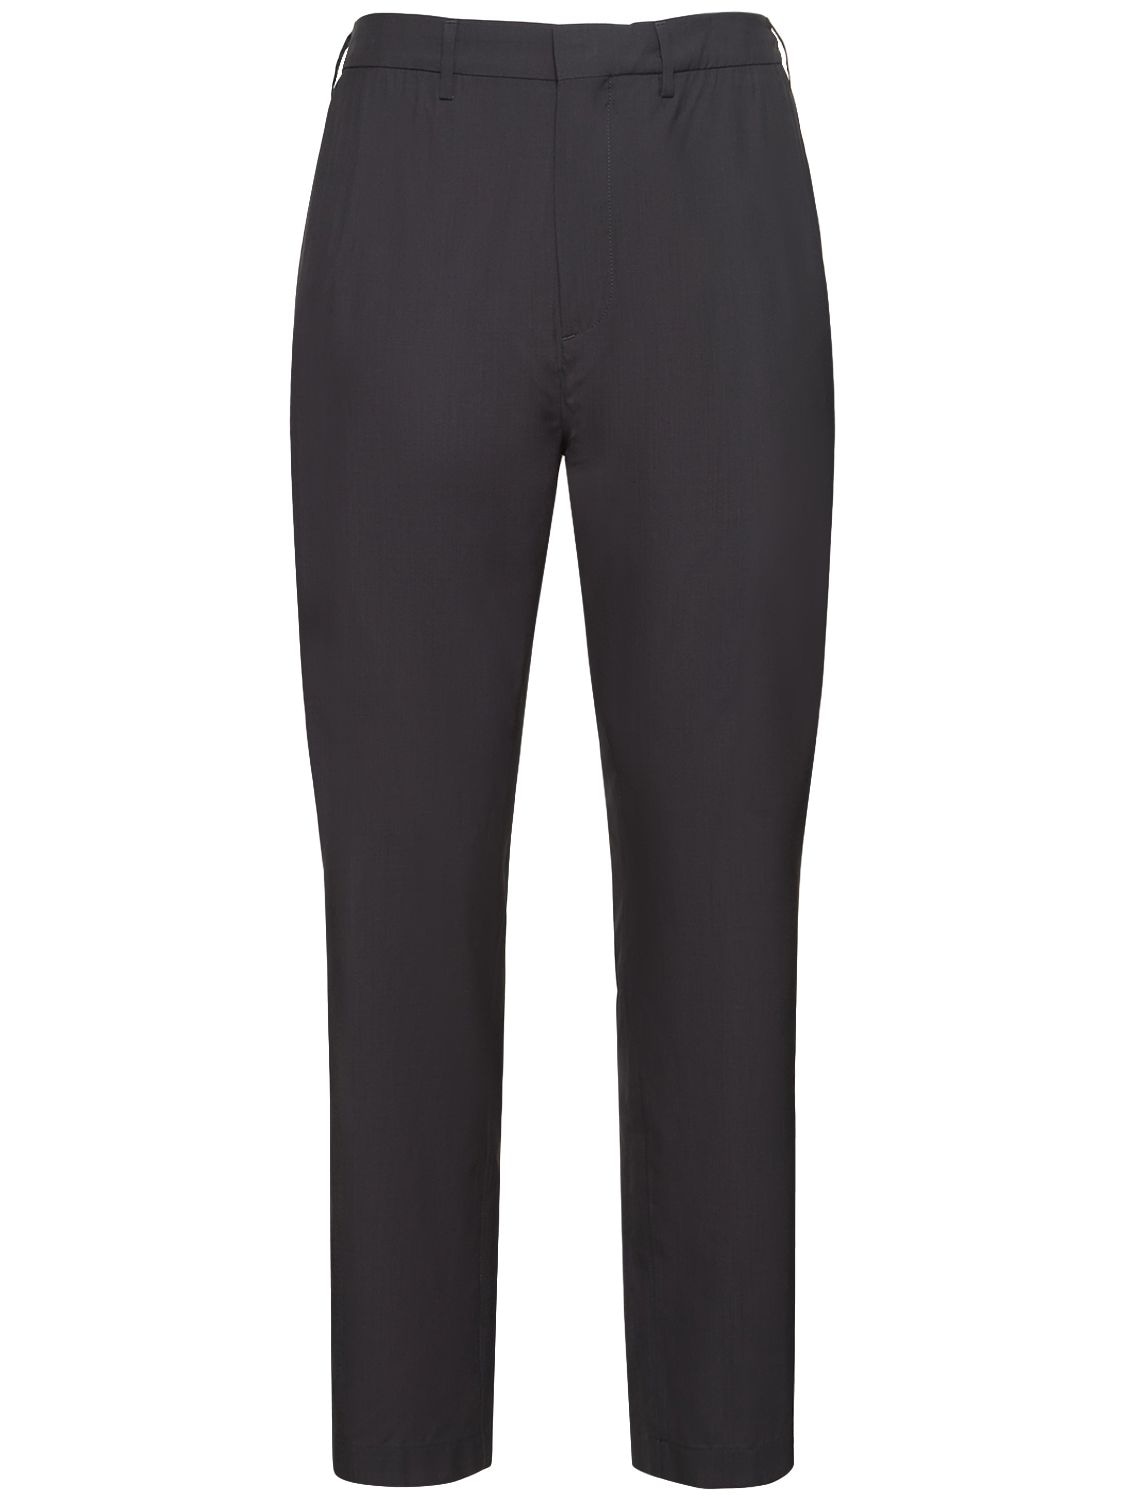 DUNHILL Wool Blend Sports Pants